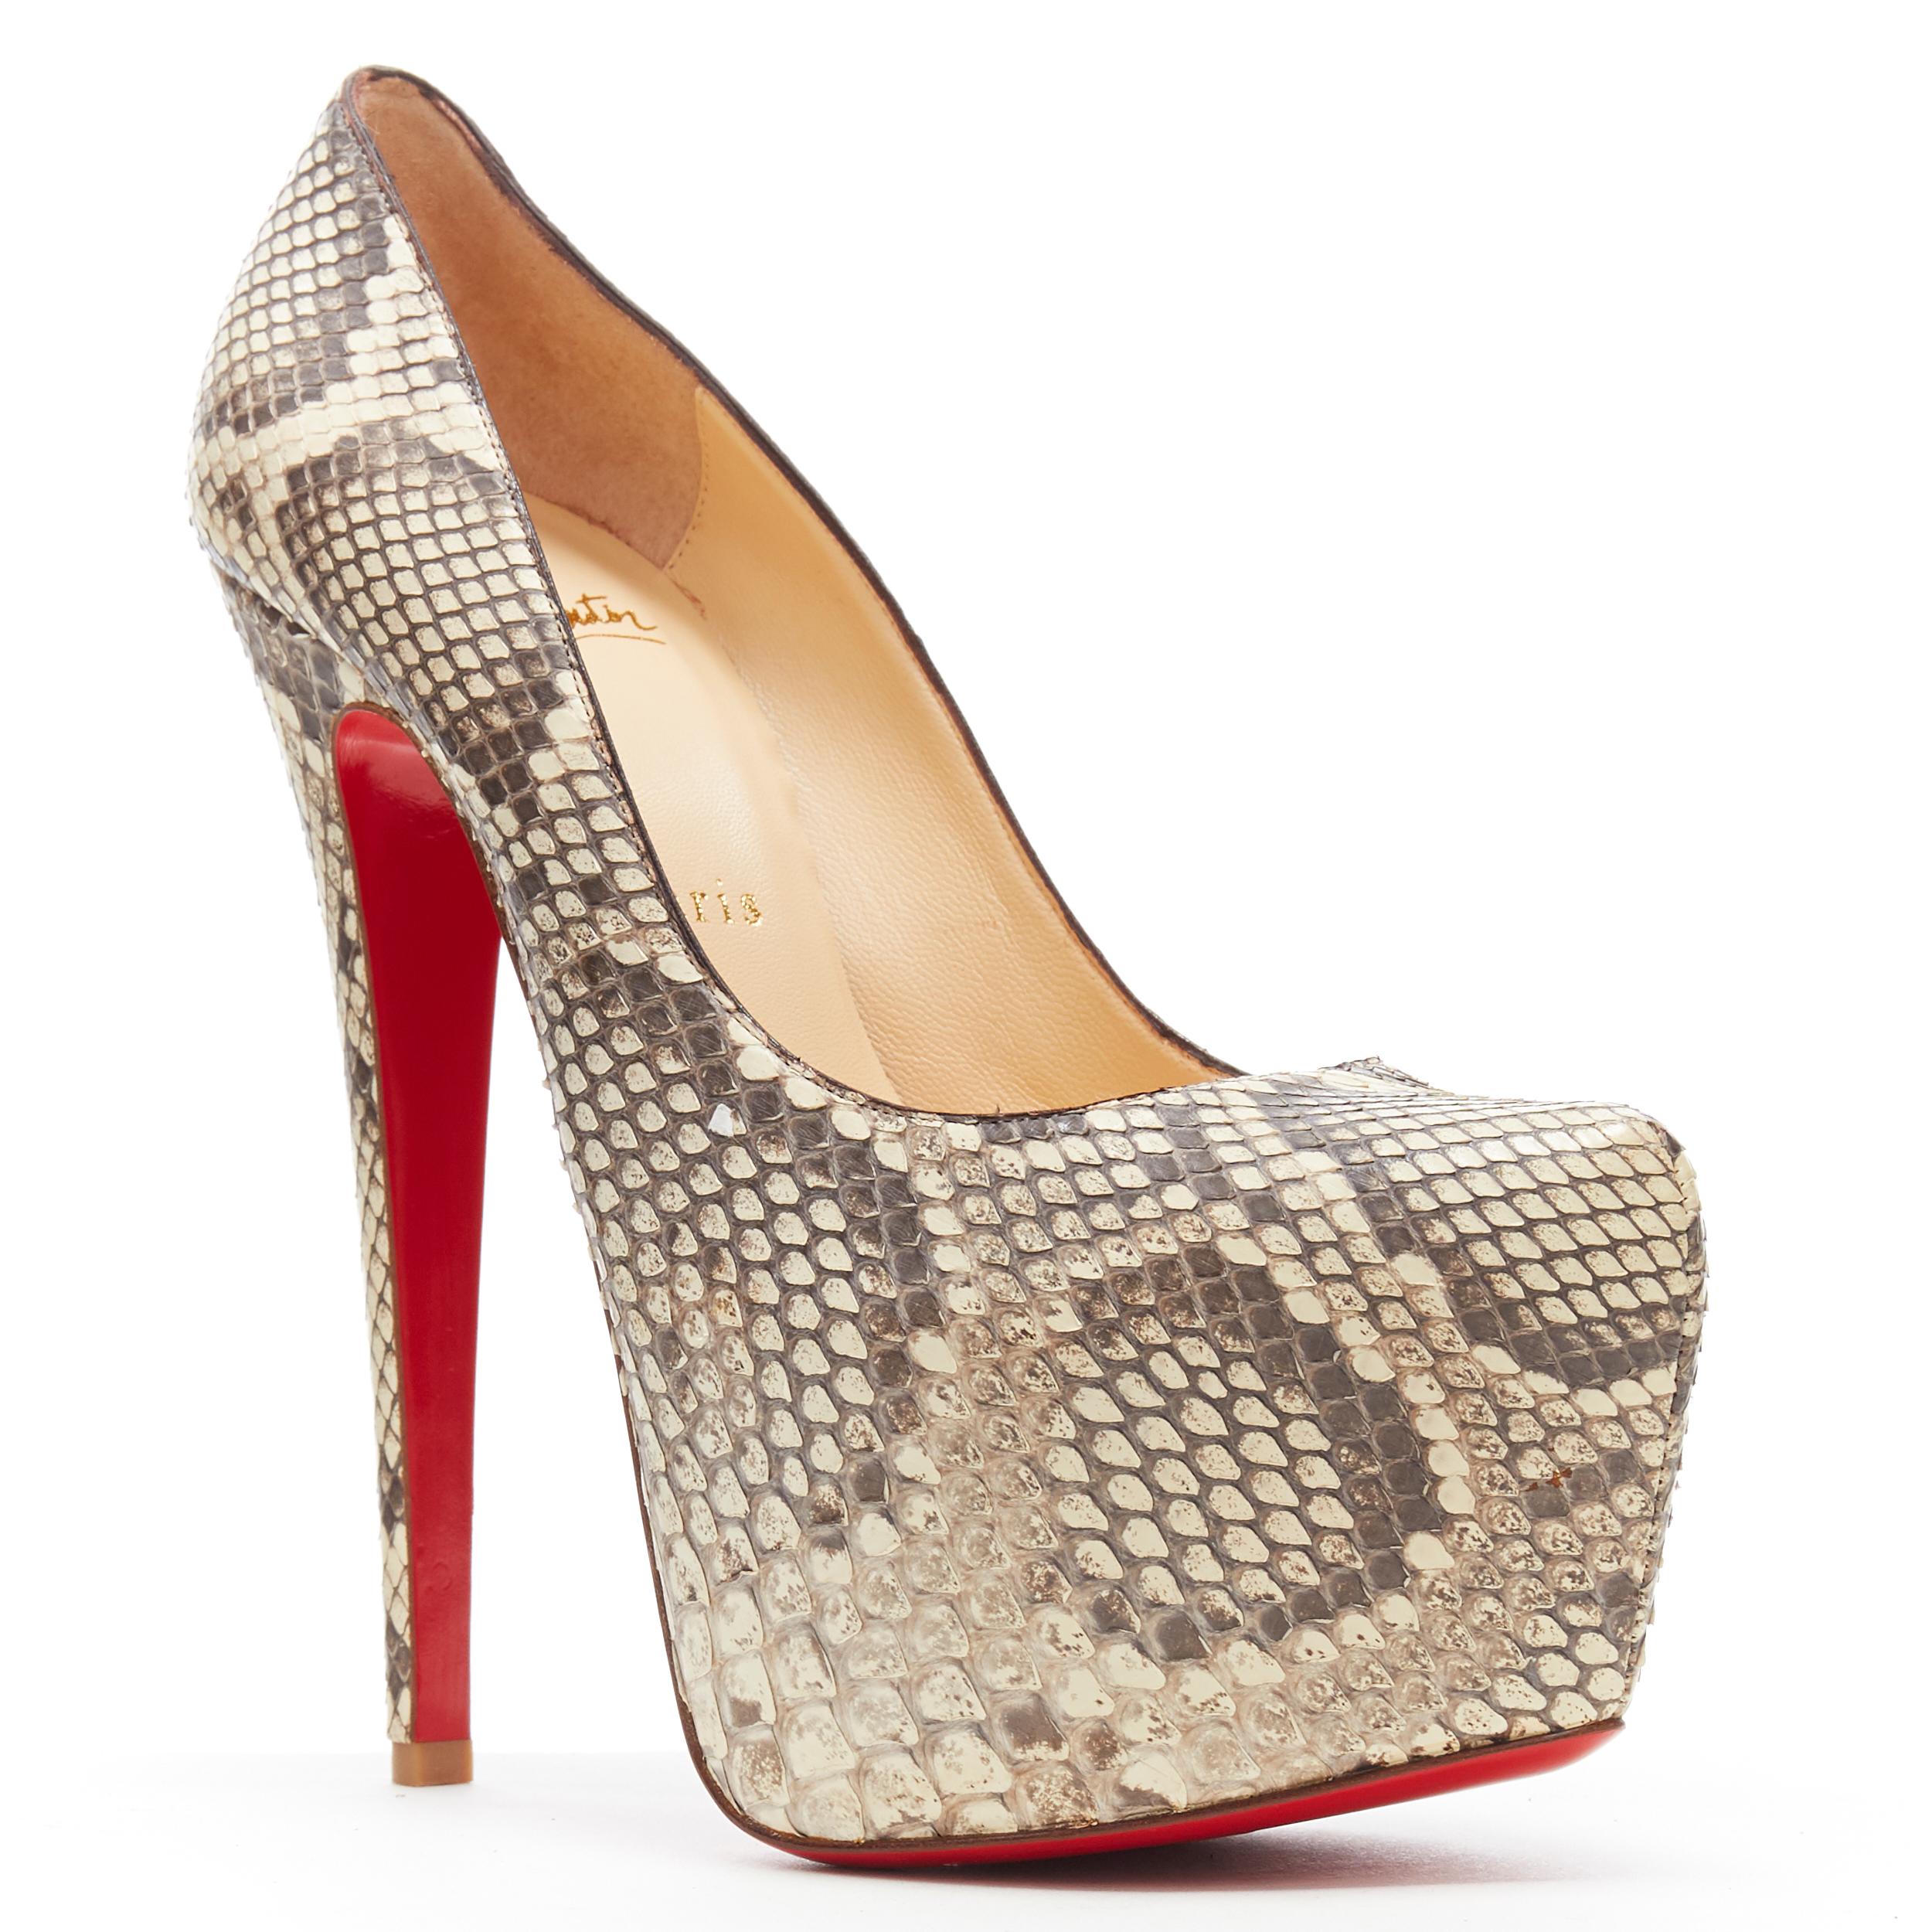 new CHRISTIAN LOUBOUTIN Daffodile 160 genuine scaled leather platform heel EU37
Brand: Christian Louboutin
Designer: Christian Louboutin
Model Name / Style: Daffodile 160
Material: Leather
Color: Brown
Pattern: Animal Print
Closure: Slip on
Lining